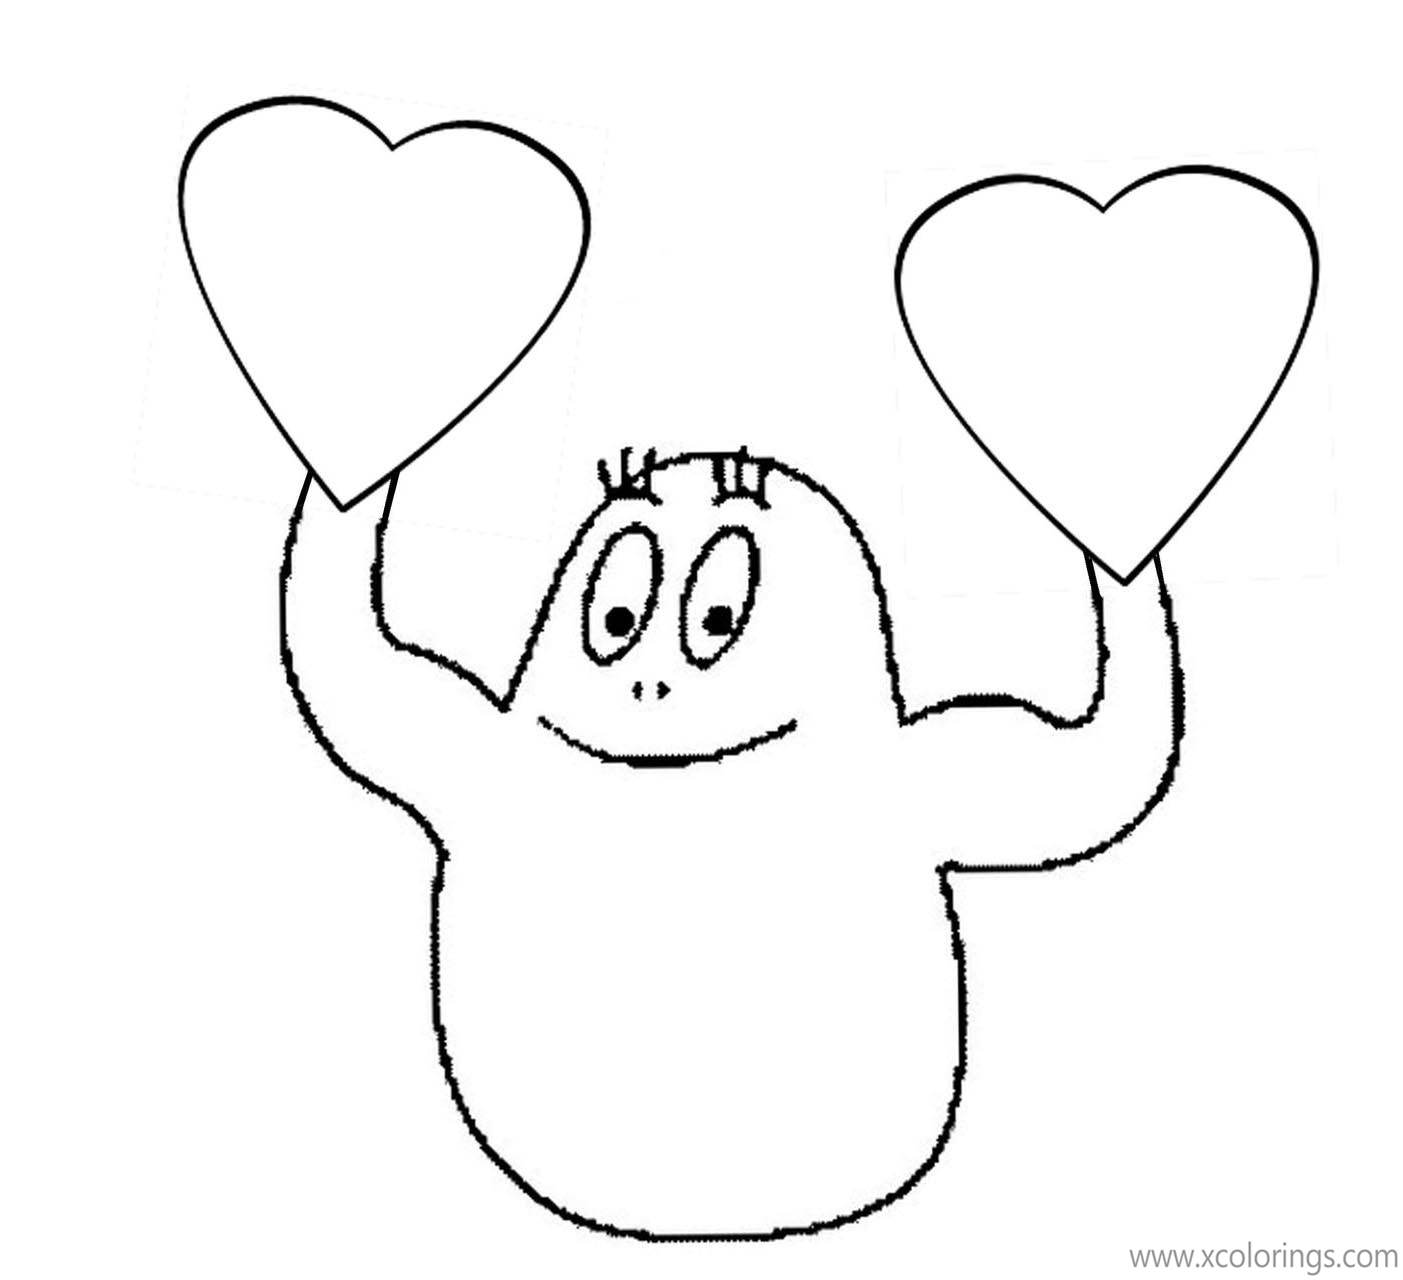 Free Barbapapa with Hearts Coloring Pages printable